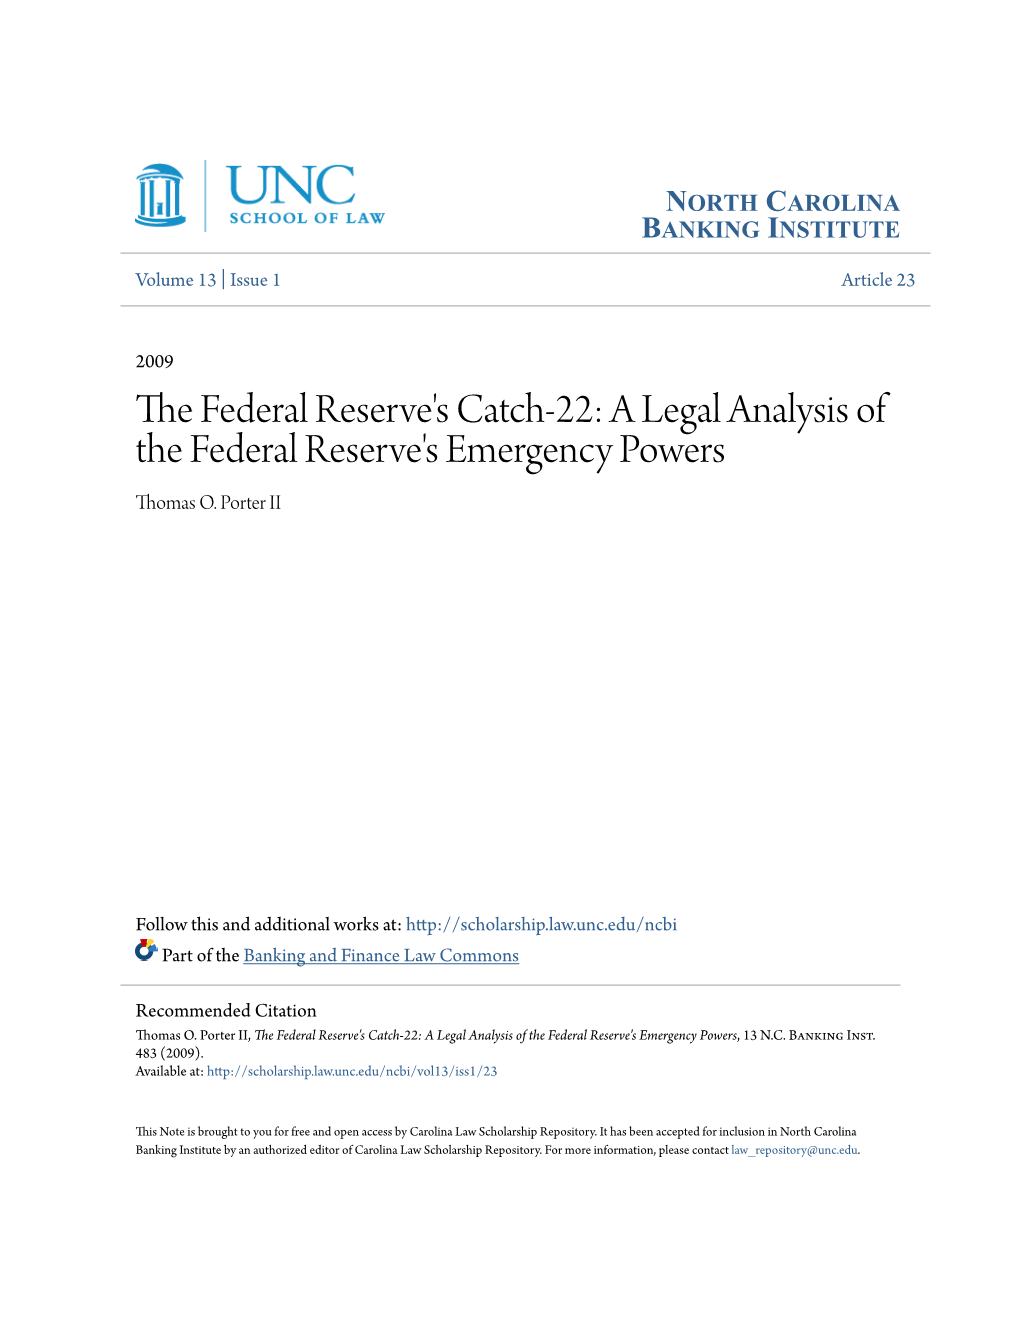 The Federal Reserve's Catch-22: a Legal Analysis of the Federal Reserve's Emergency Powers, 13 N.C